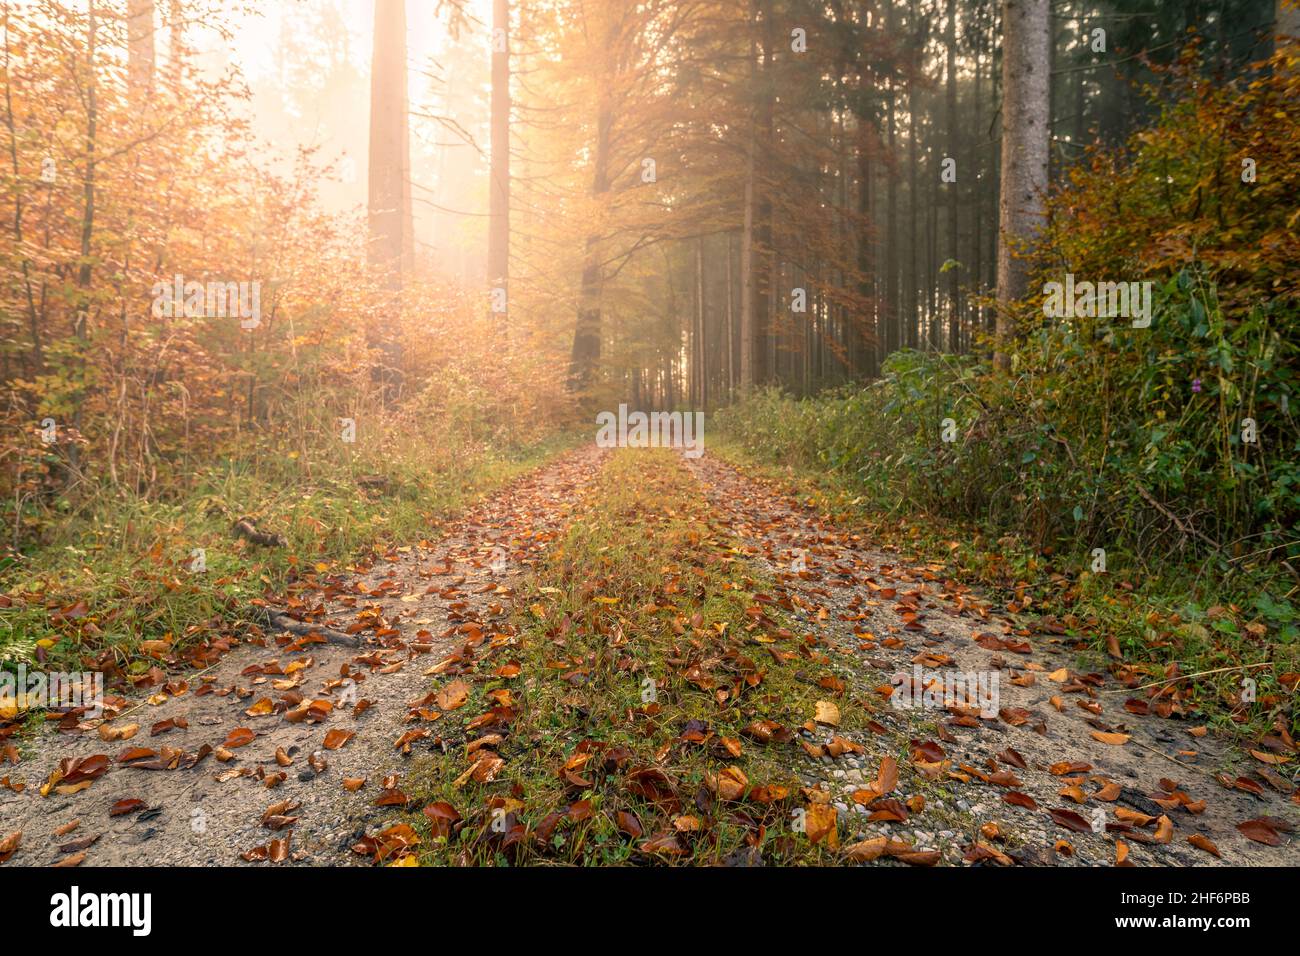 Sunlight is streaming through a fall colored forest with an idyllic rural road Stock Photo